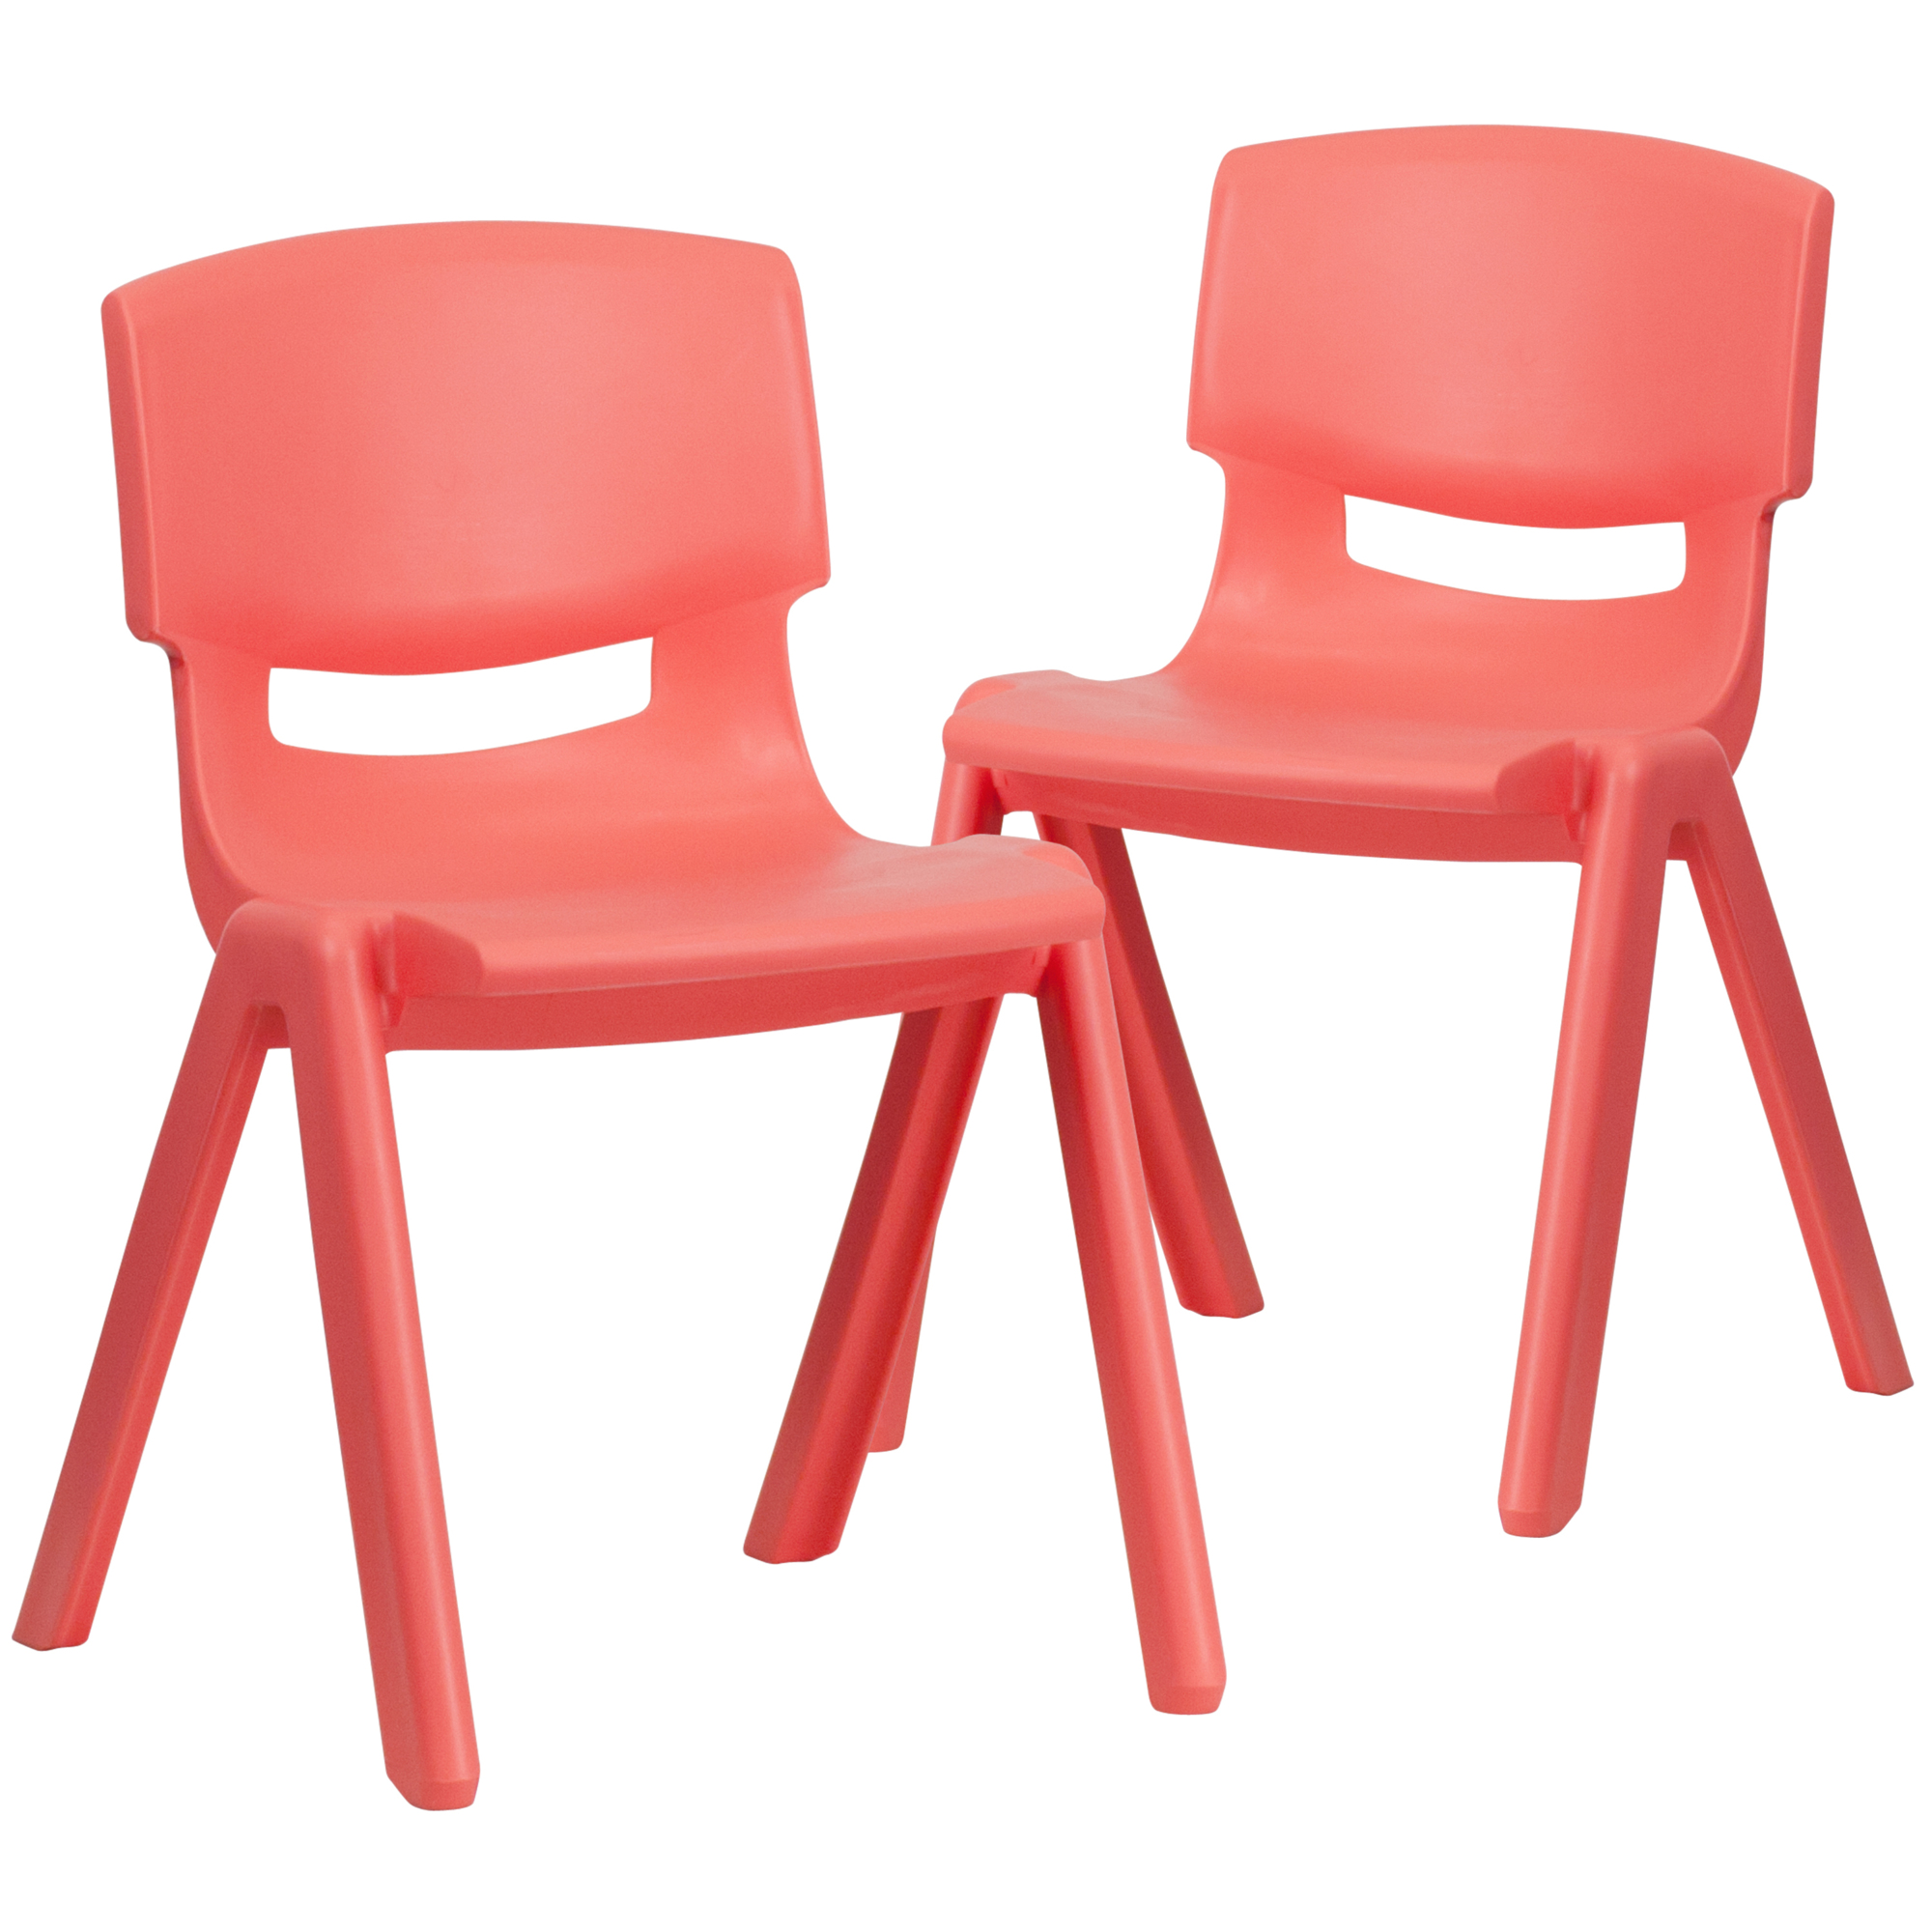 Flash Furniture, 2 Pack Red Plastic Stack School Chair-13.25Inch H Seat, Primary Color Red, Included (qty.) 2, Model 2YUYCX004RED